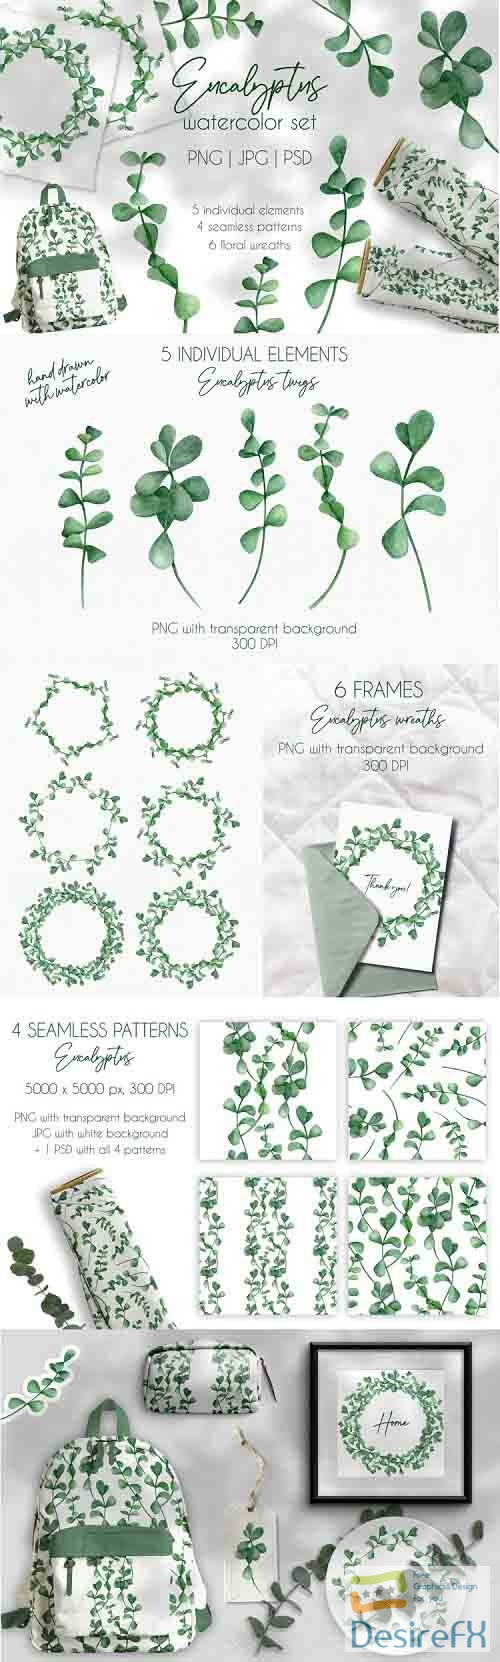 Eucalyptus Watercolor Clipart Collection. Floral Wreaths PNG - 1269033